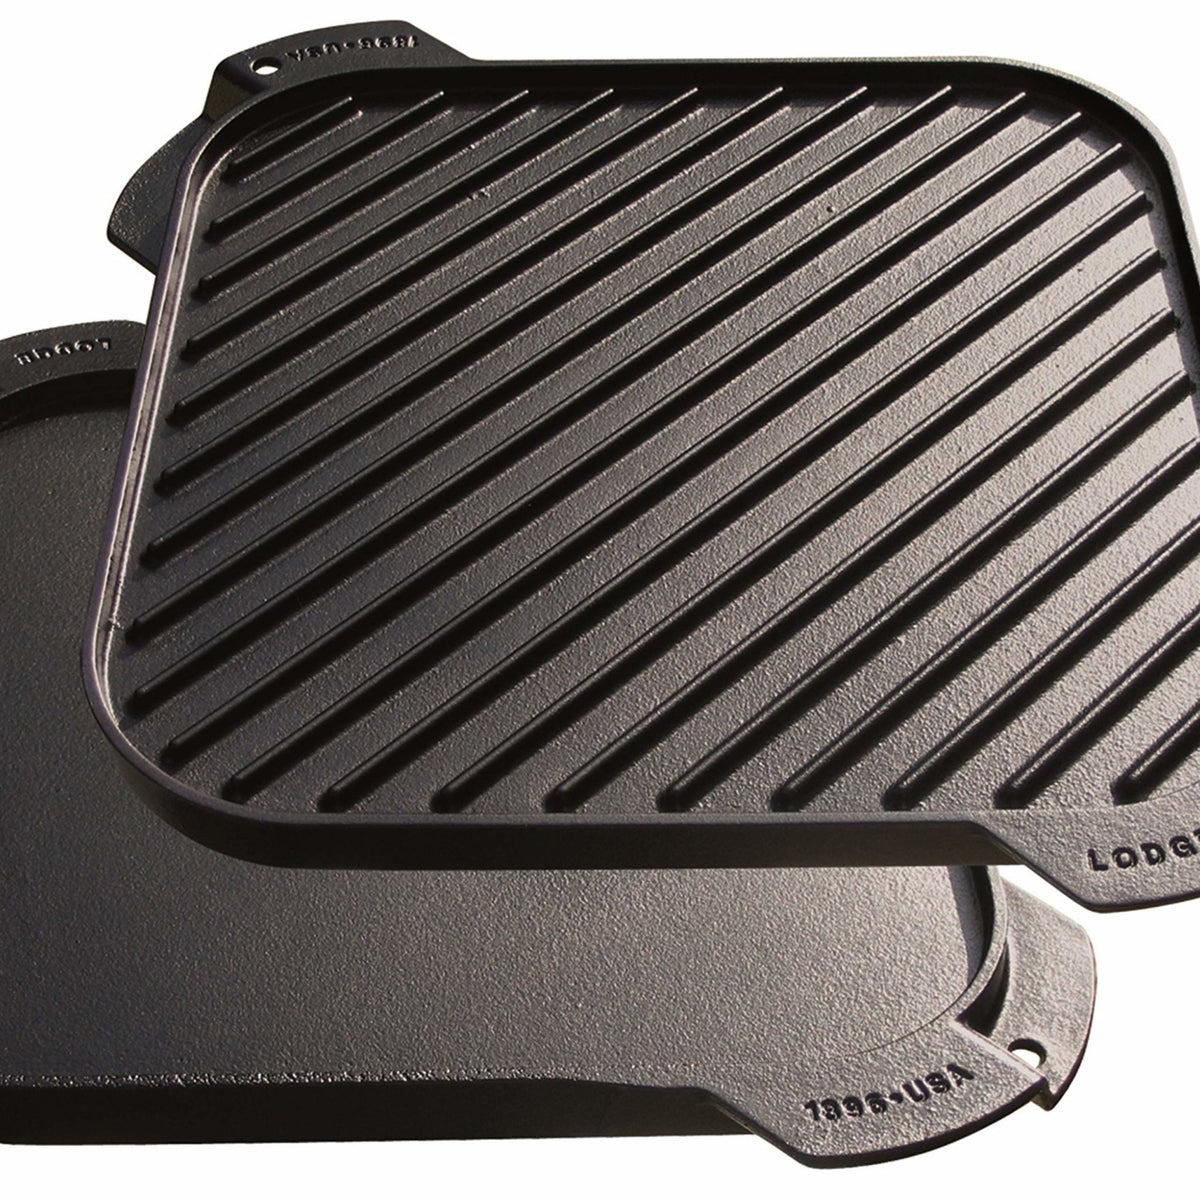 Cast Iron Griddle (20 by 10), Reversible, Pre-Seasoned, Grill and Griddle  Combo Pan, BBQ, Campfire, fits over two stovetop burners